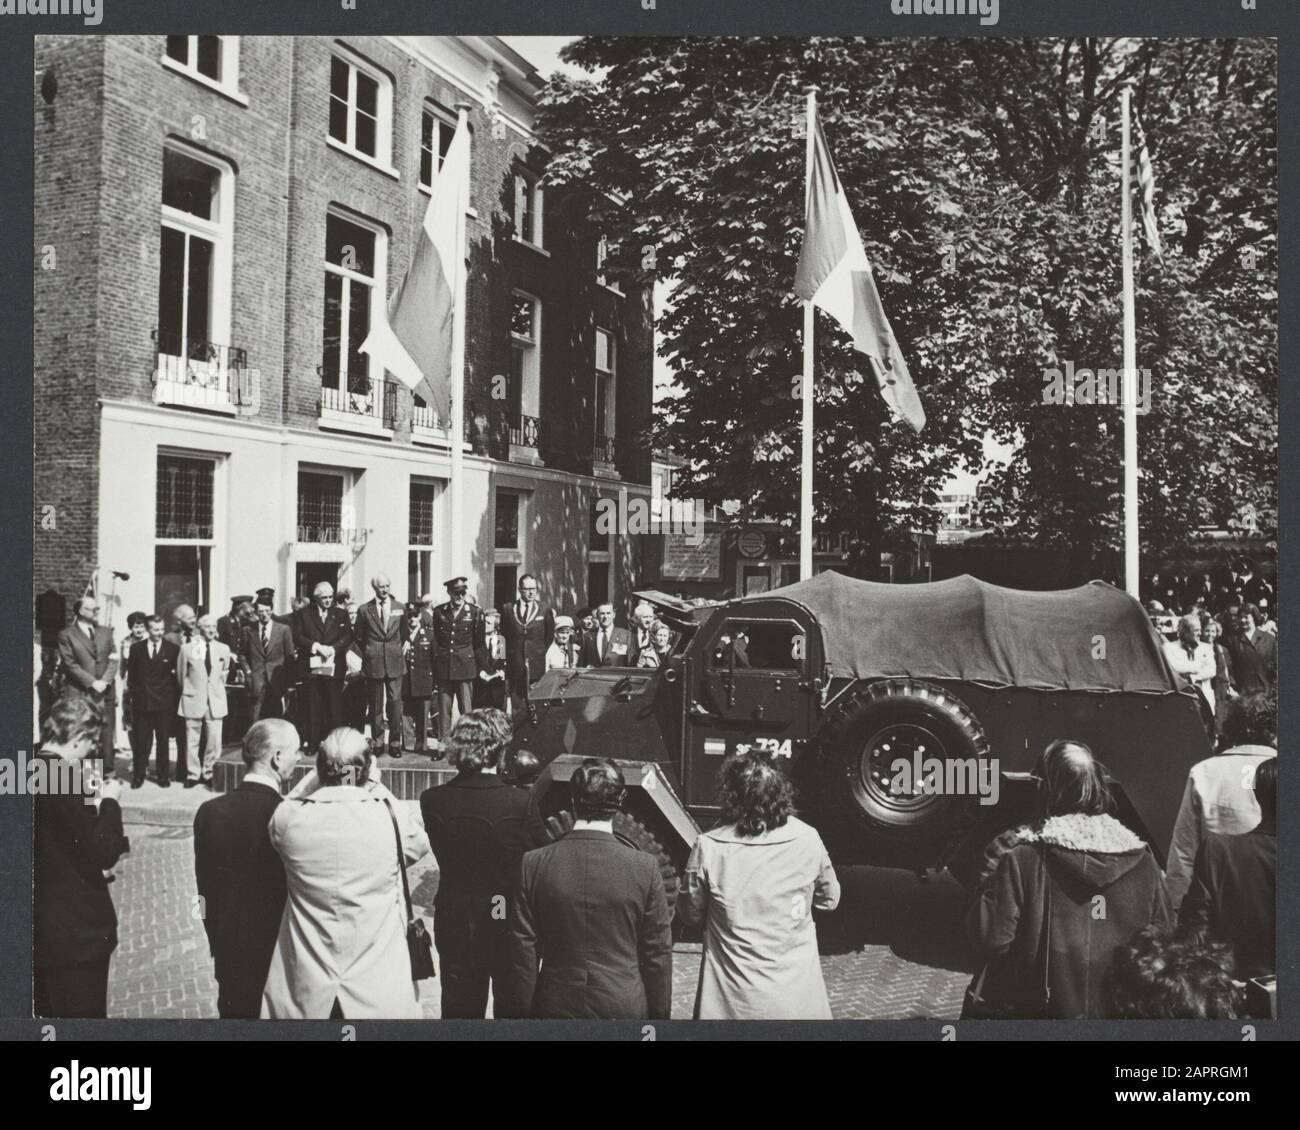 Armistice Compiègne 1940  Prins Bernhard opened in Wageningen the restored capitulation room of the former Hotel De Wereld. Defilé of old military vehicles. Next to the prince the Canadian general b.d. itching Annotation: Photo does not belong in this folder Date: May 5, 1975 Location: Wageningen Keywords: war, wars Stock Photo